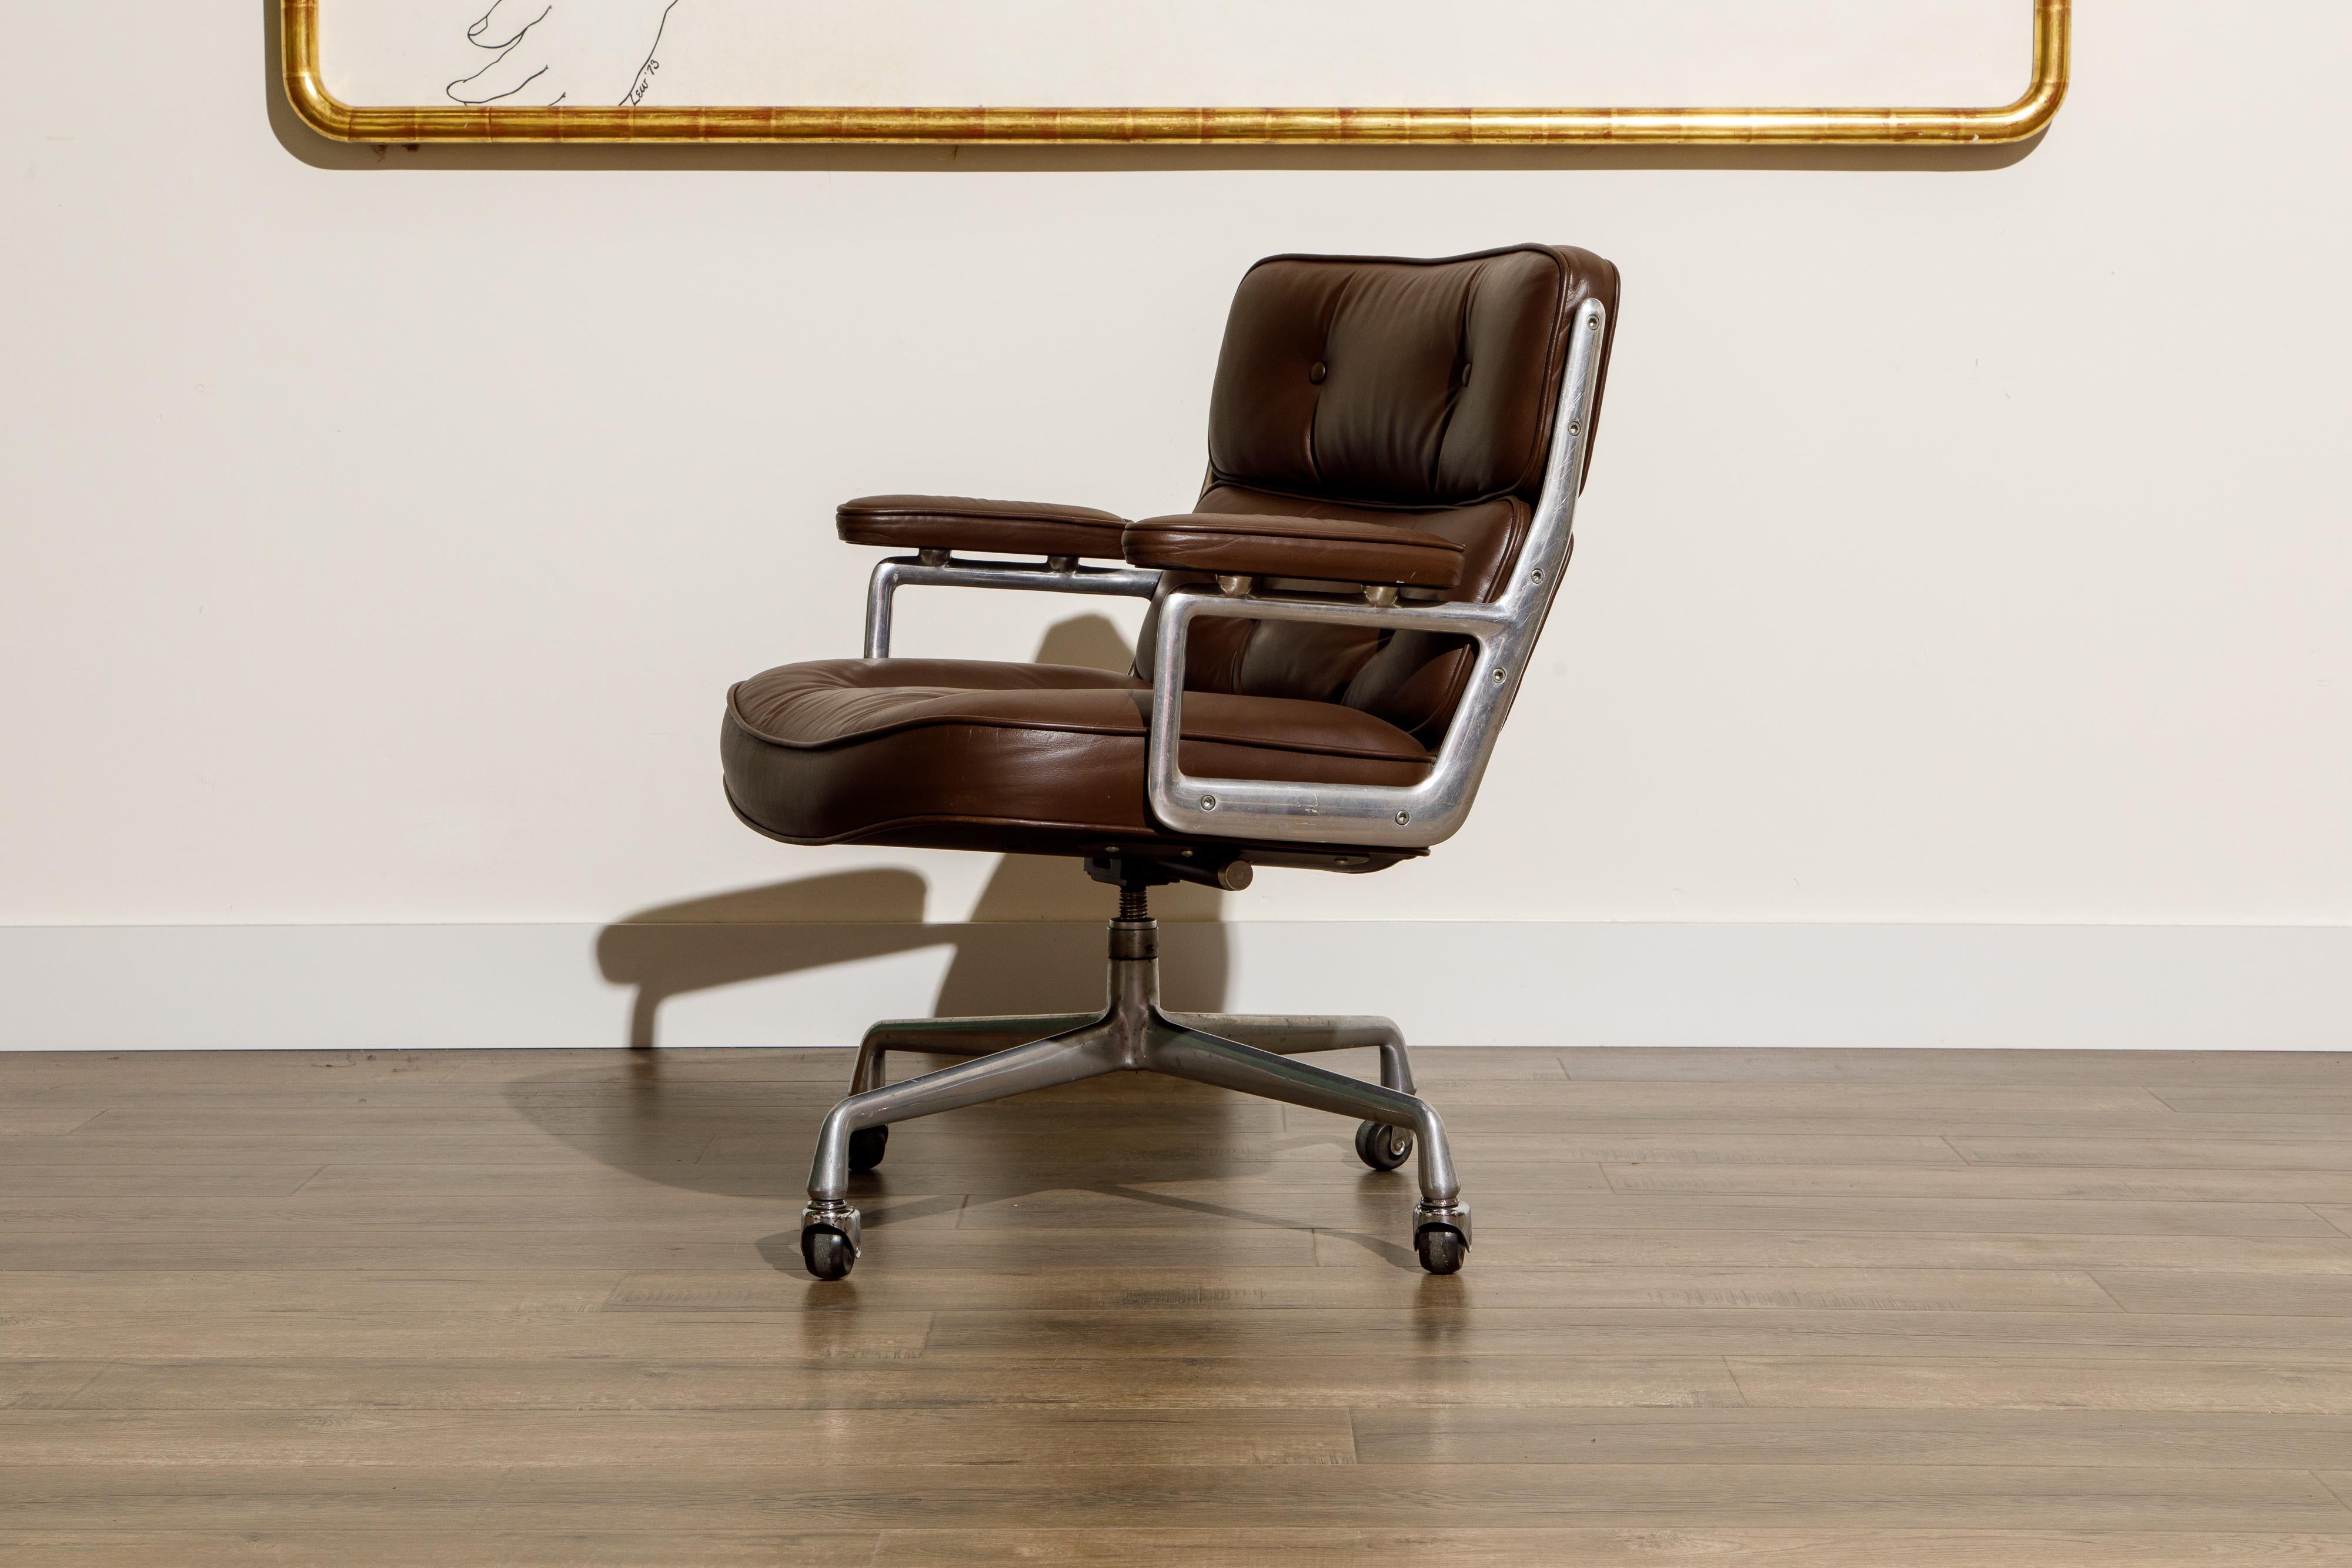 Late 20th Century Charles Eames for Herman Miller 'Time Life Lobby' Desk Chair 1976, Signed